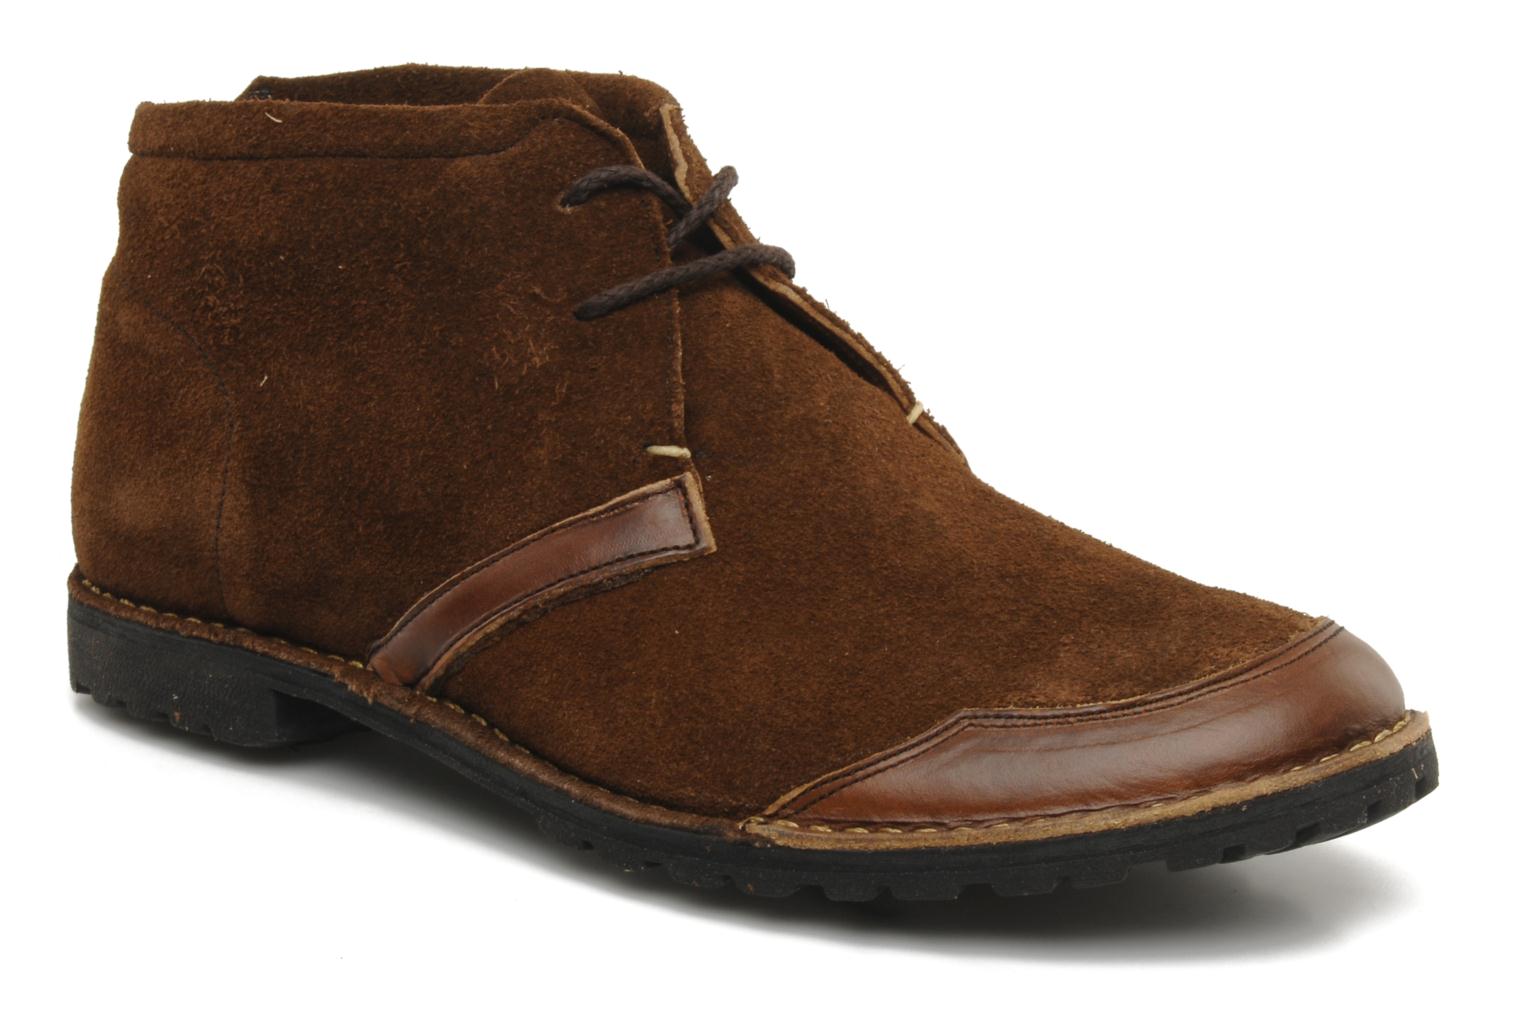 Foto Botines Timberland Earthkeepers Rugged Original Handcrafted Chukka Hombre foto 123488